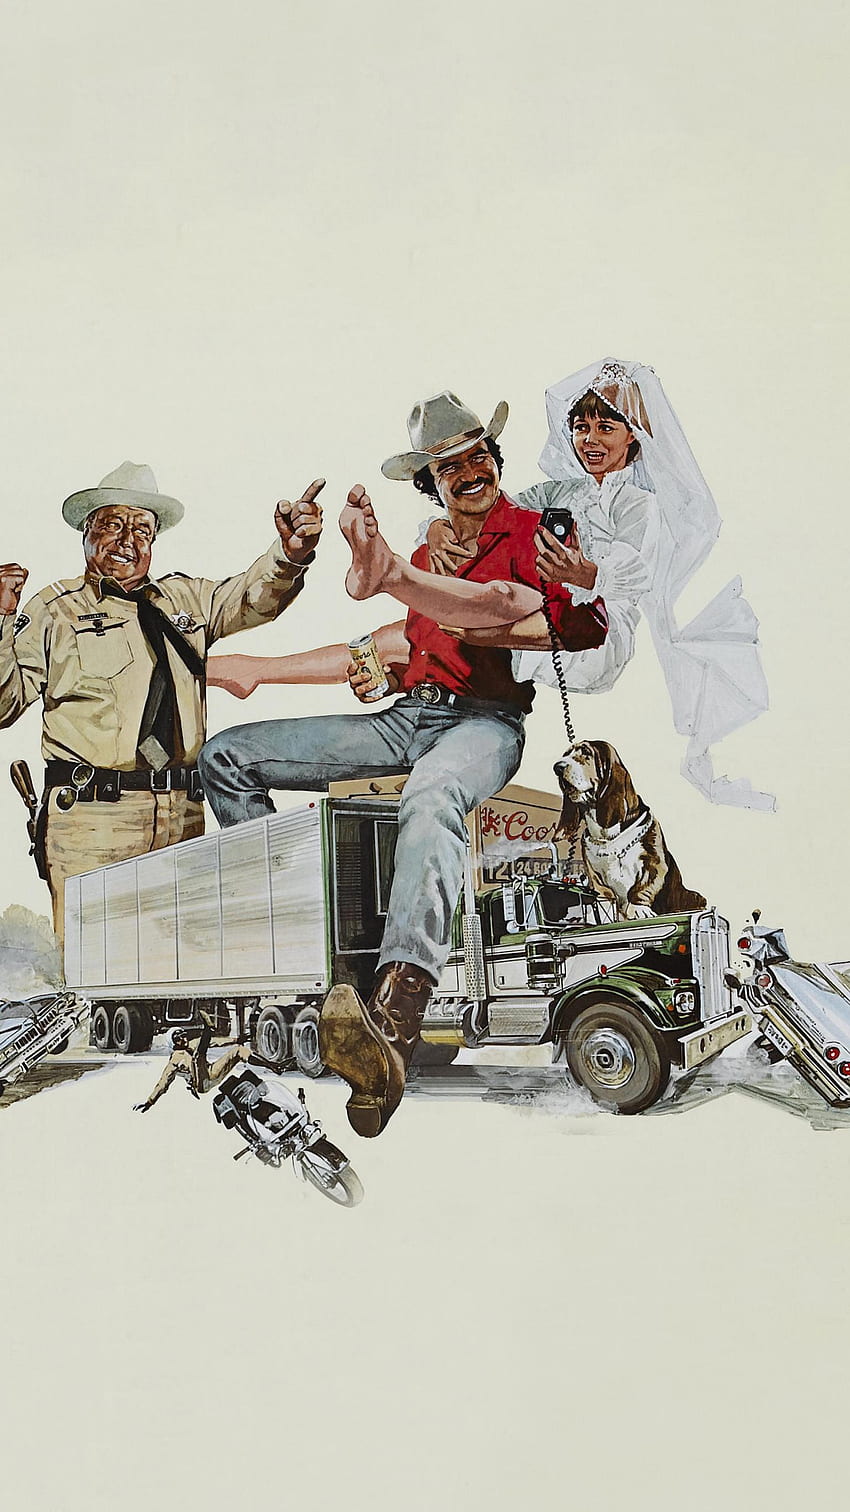 Smokey and the bandit, cars, art, trans am, movie, painting, 70s HD phone wallpaper